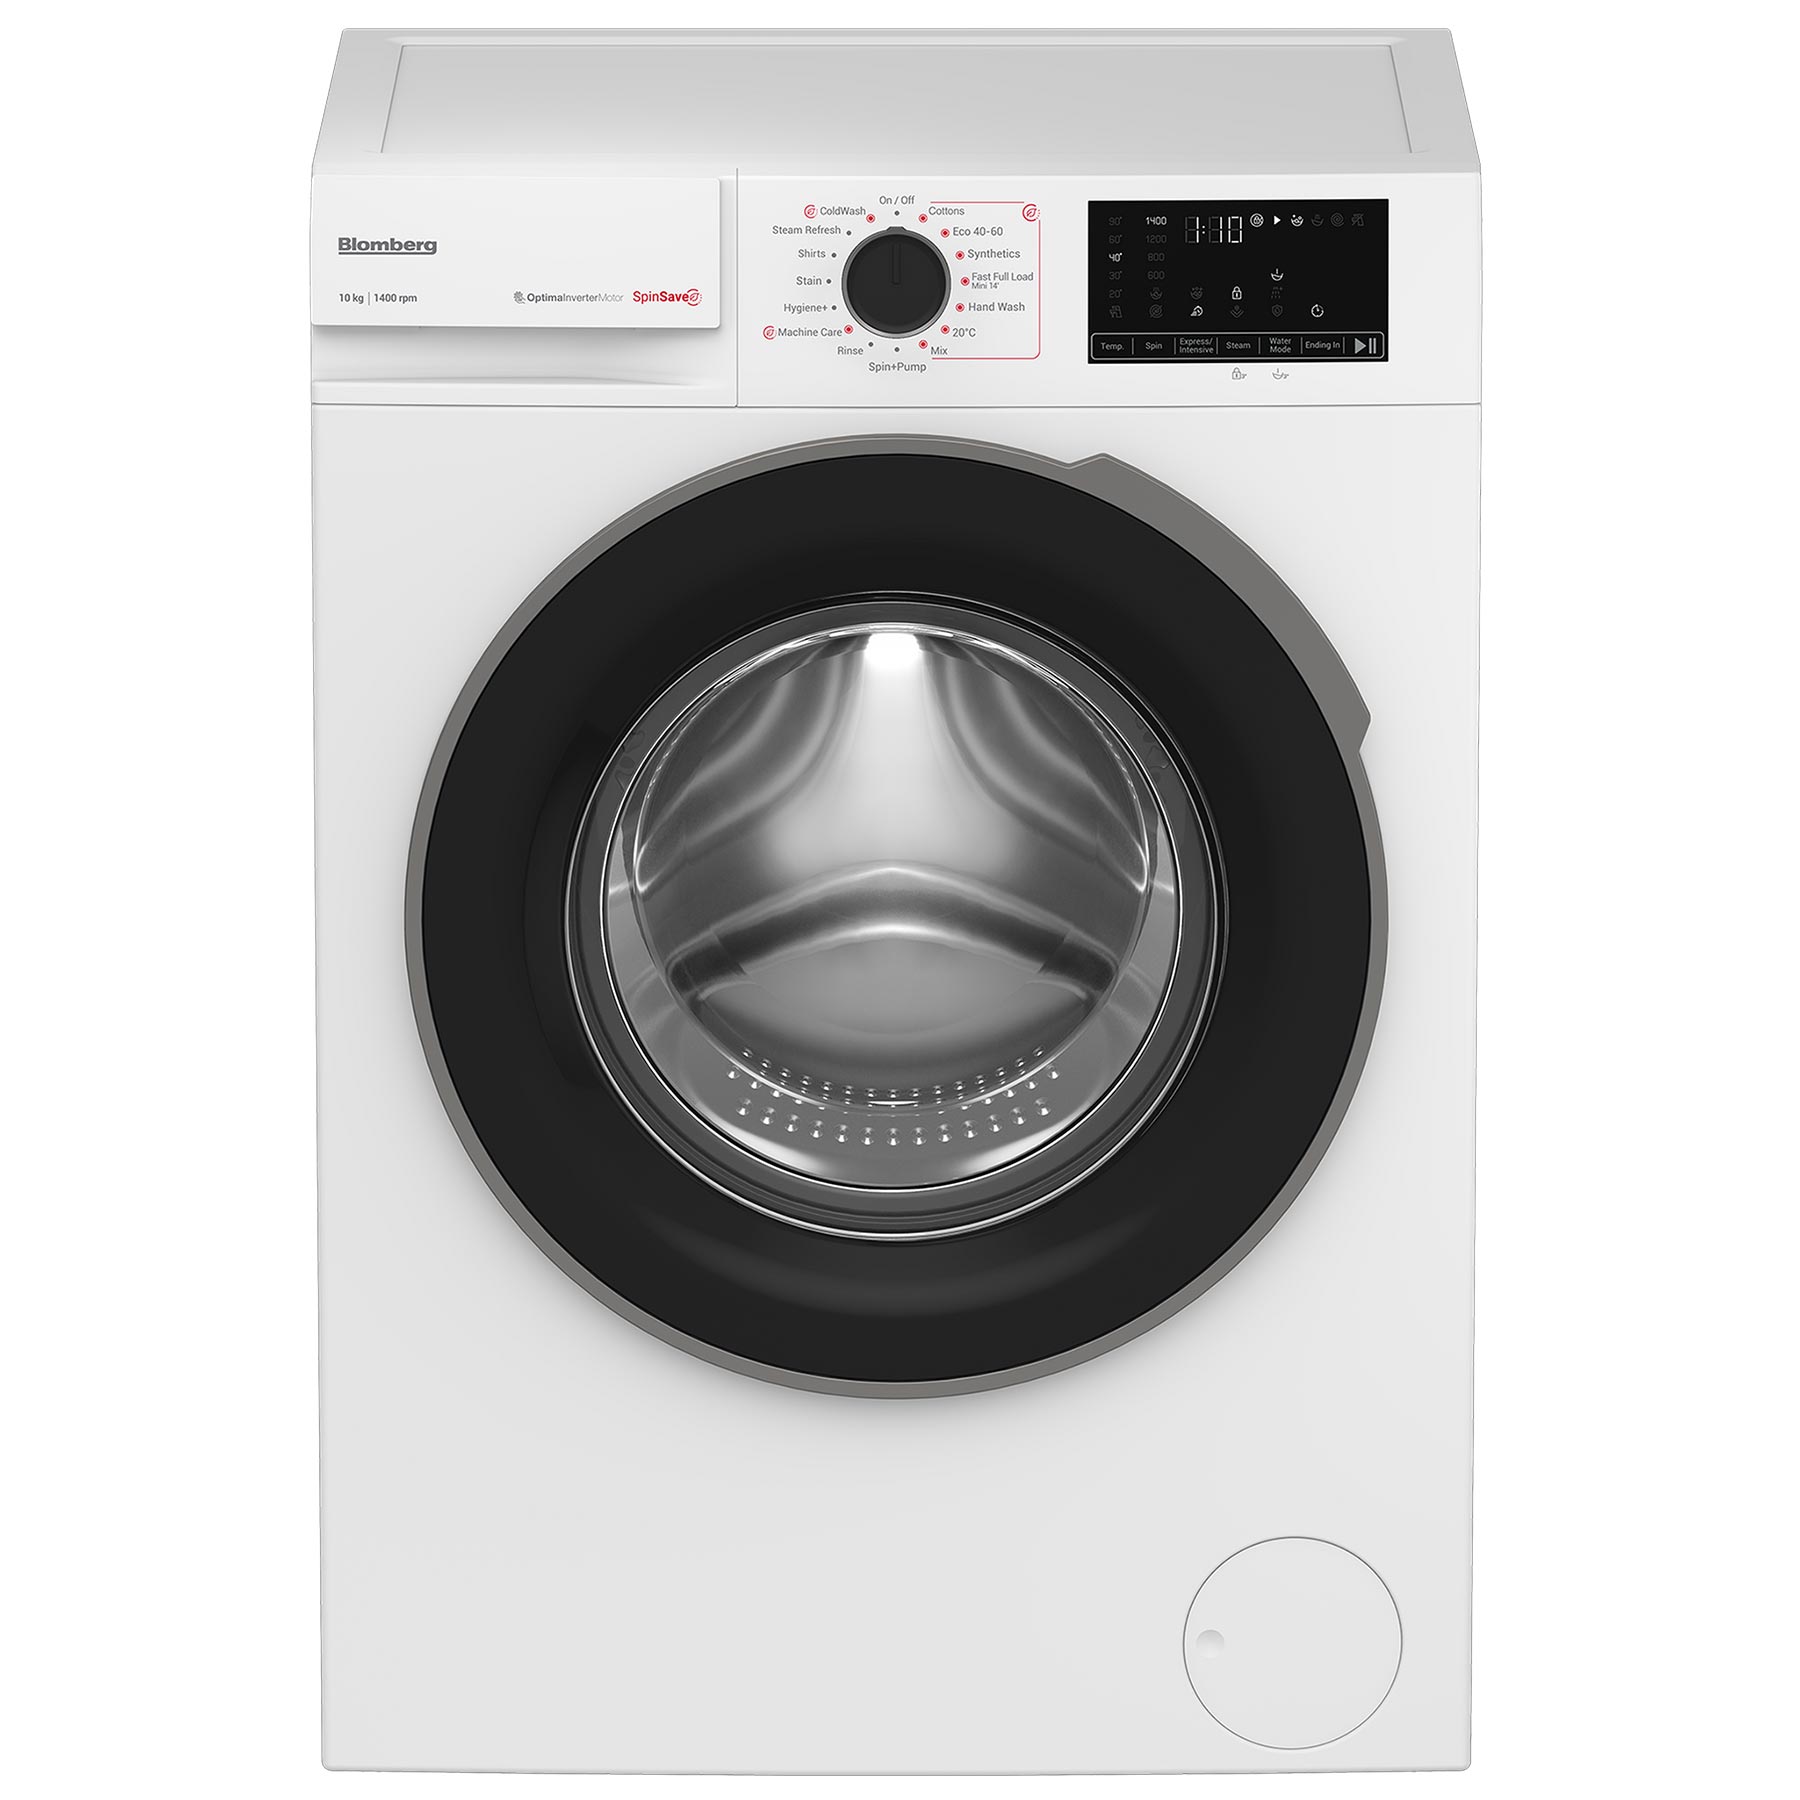 Blomberg LWA210461W Washing Machine in White 1400rpm 10kg A Rated 3yr